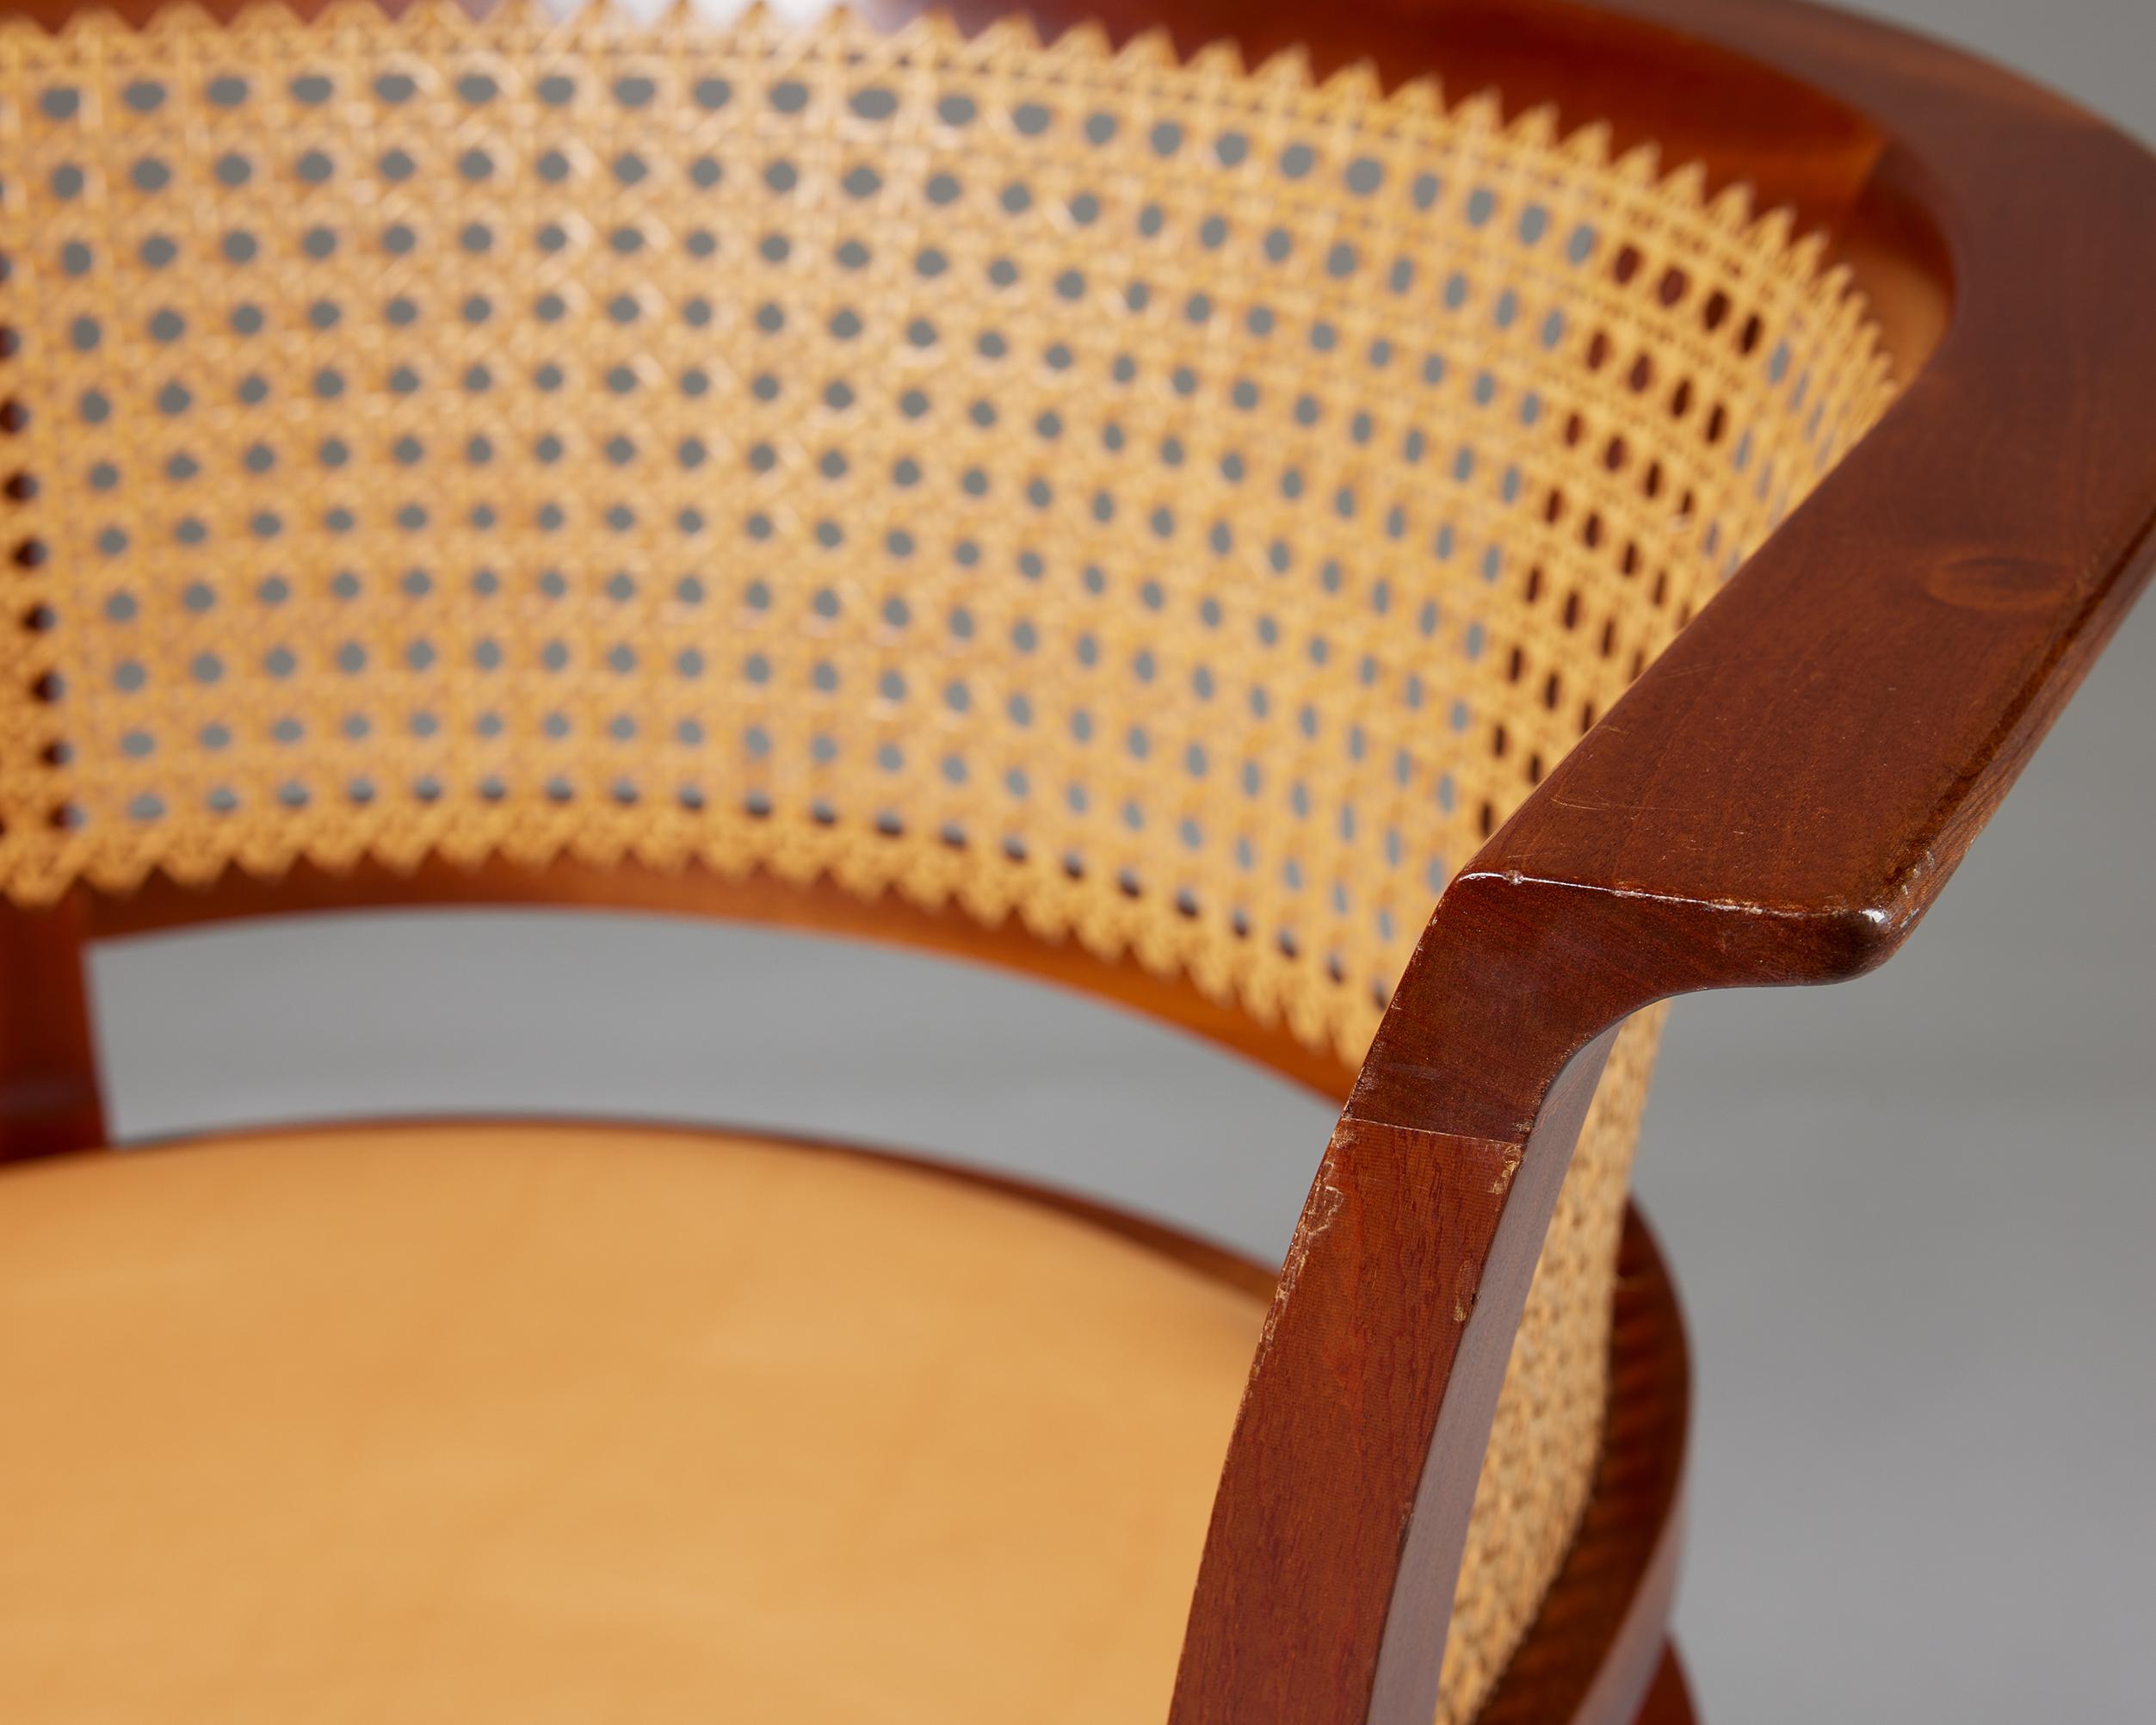 Danish ‘The Faaborg Chair’ designed by Kaare Klint for Rud. Rasmussen Cabinetmakers For Sale